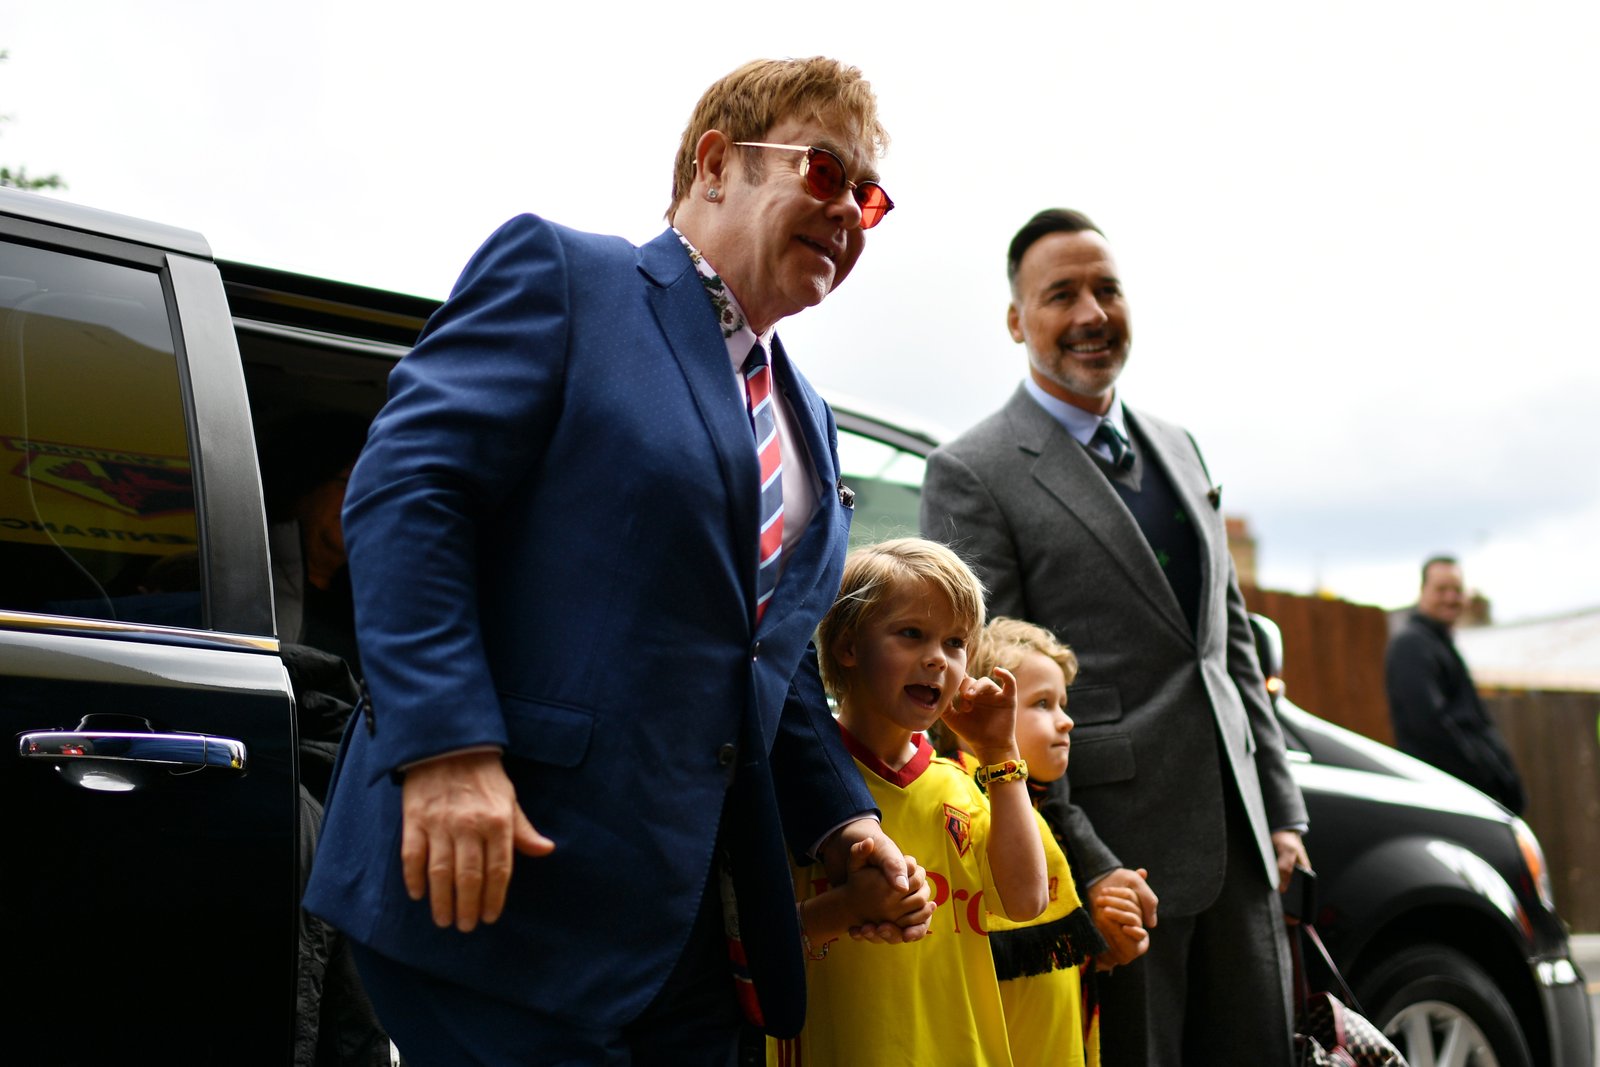 Sir Elton John and David Furnish with their sons Elijah and Zachary in England in 2011 | Source: Getty Imagesin